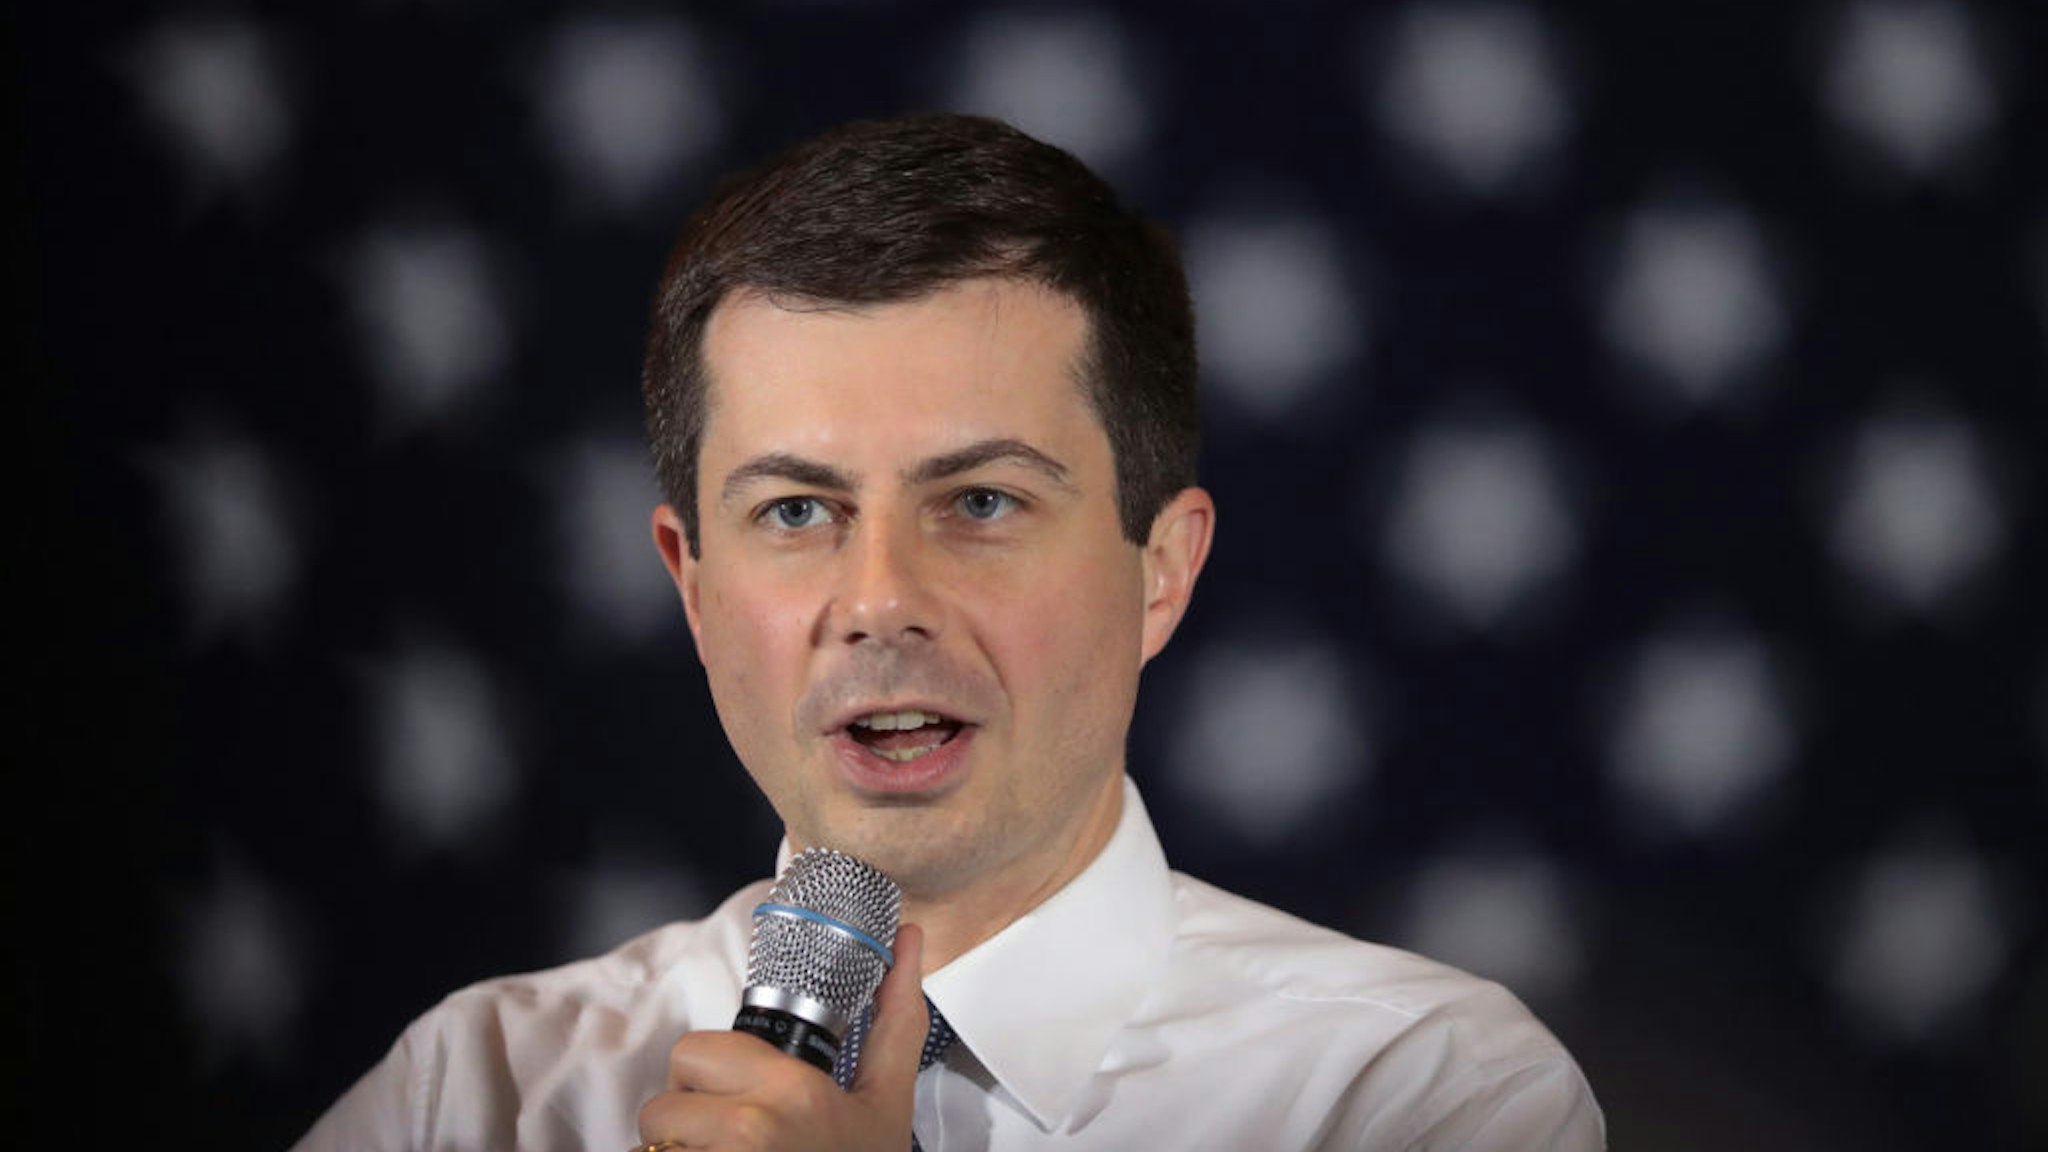 Democratic presidential candidate South Bend, Indiana Mayor Pete Buttigieg speaks to guests during a campaign stop at Cronk's restaurant on November 26, 2019 in Denison, Iowa.